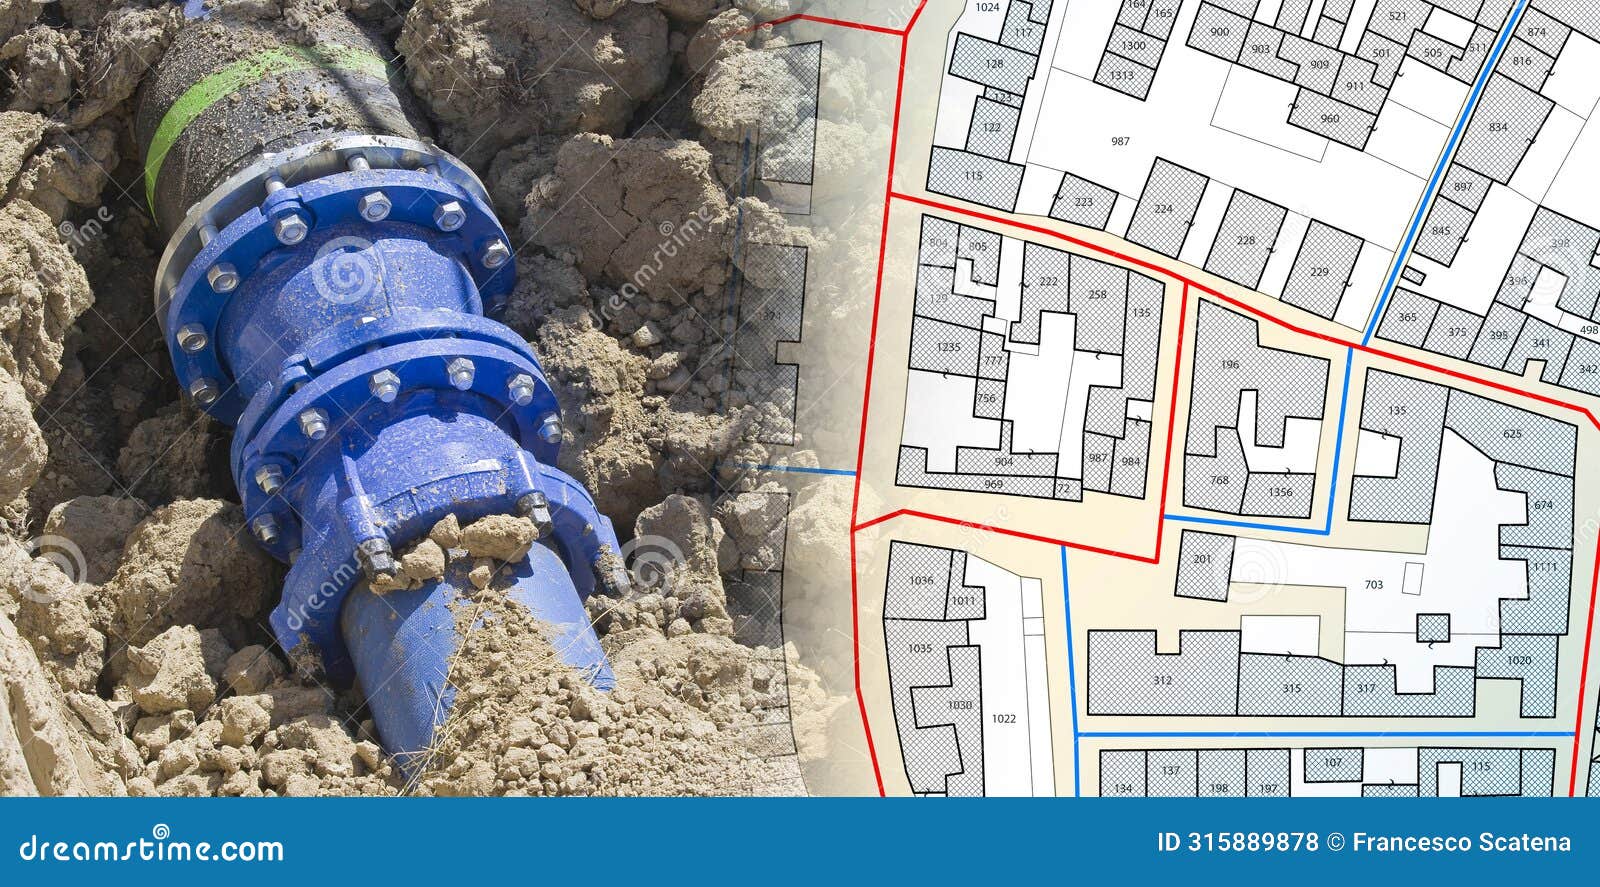 construction site with new hydraulic system of drinking water to be carried below ground surface level and imaginary cadastral map